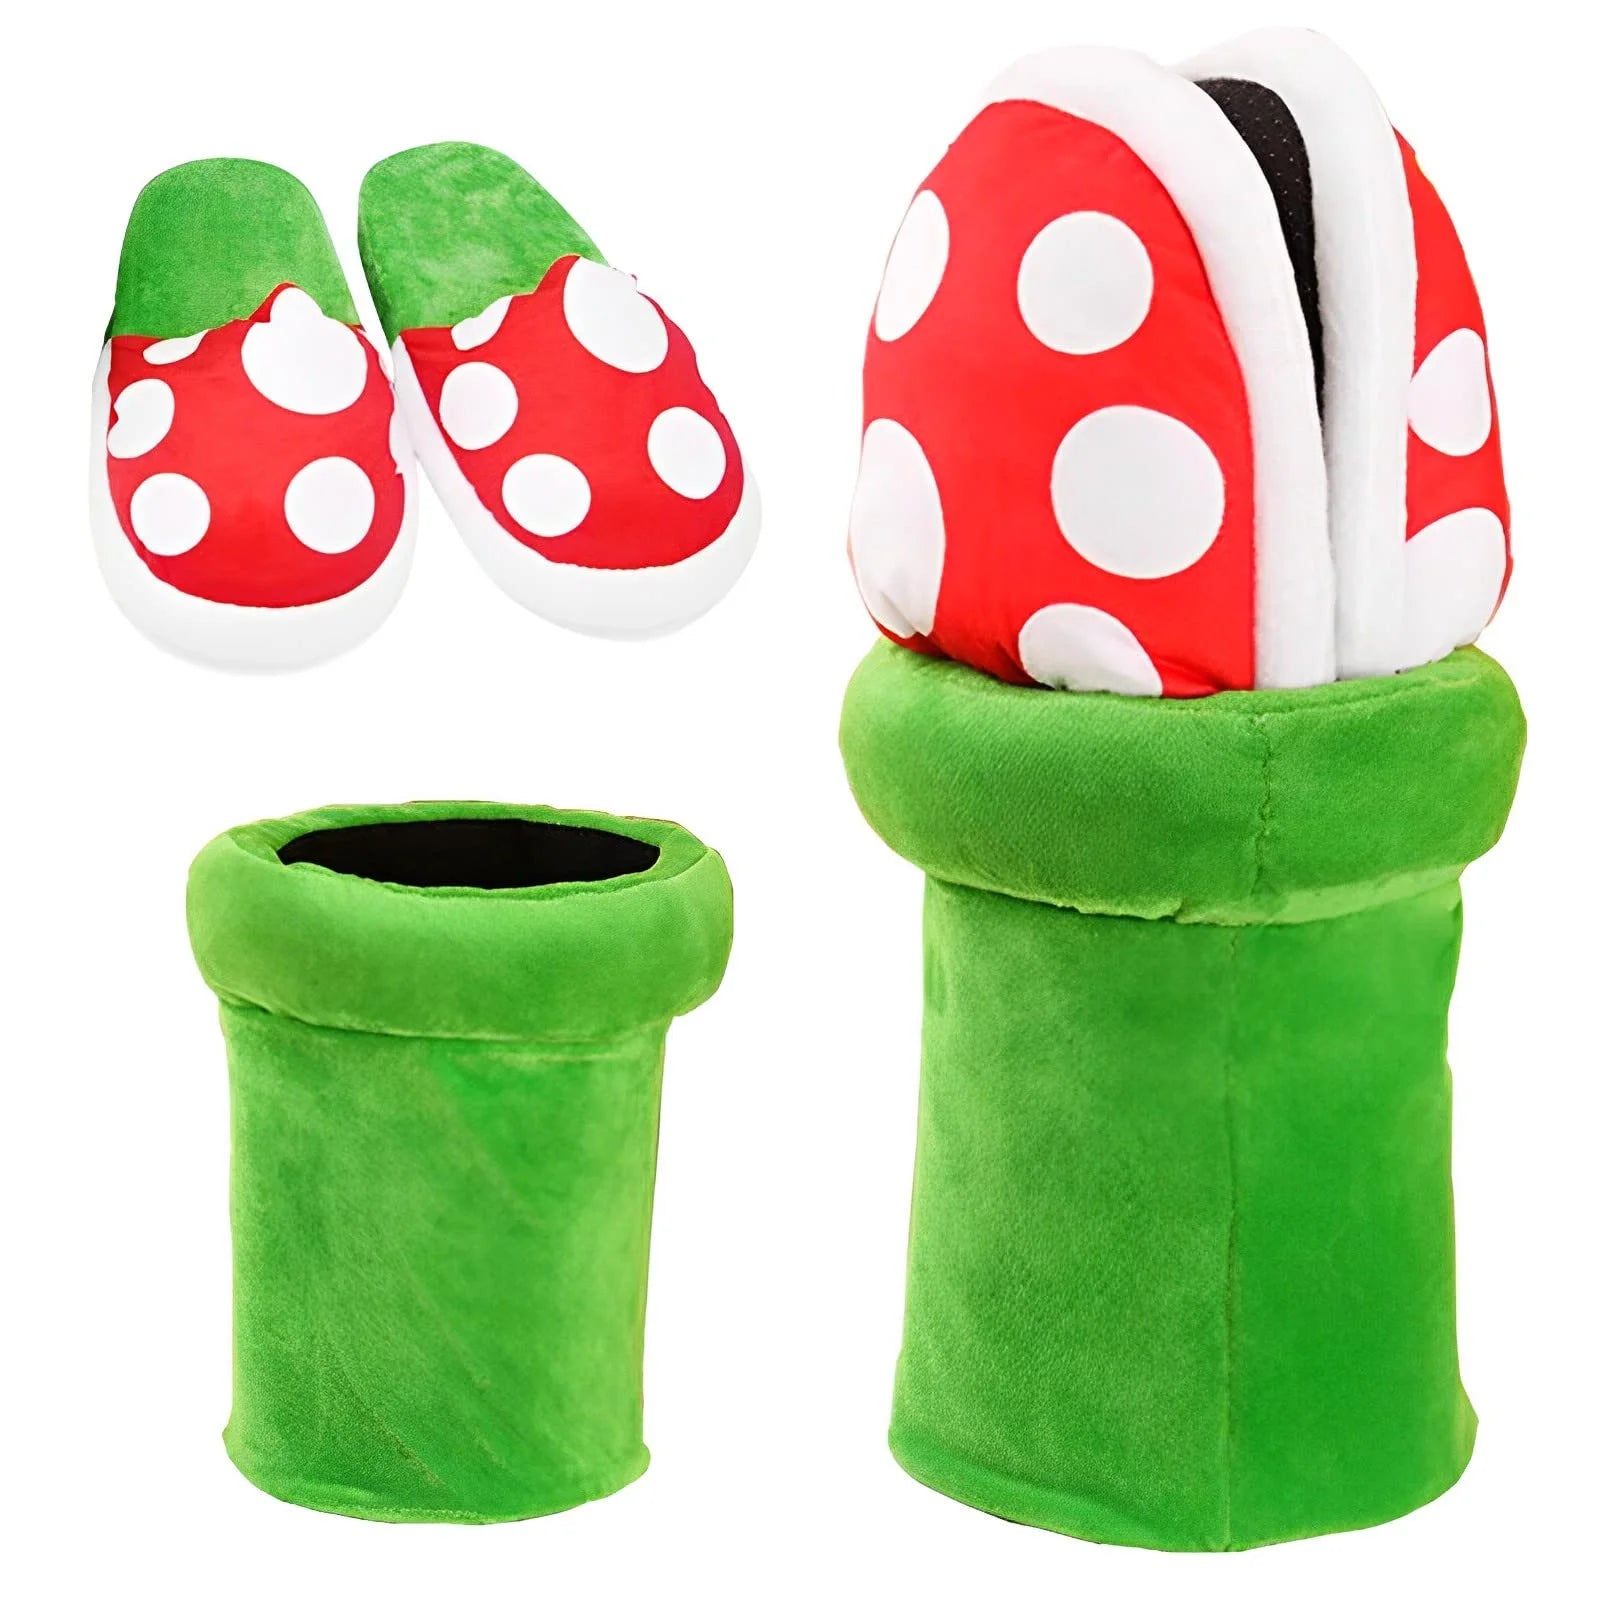 Cute Christmas Gift Piranha Plant House Slippers Creative Mushroom Stuffed Slippers Funny Gifts for Women Men Teens Bedroom Shoes ShopOnlyDeal